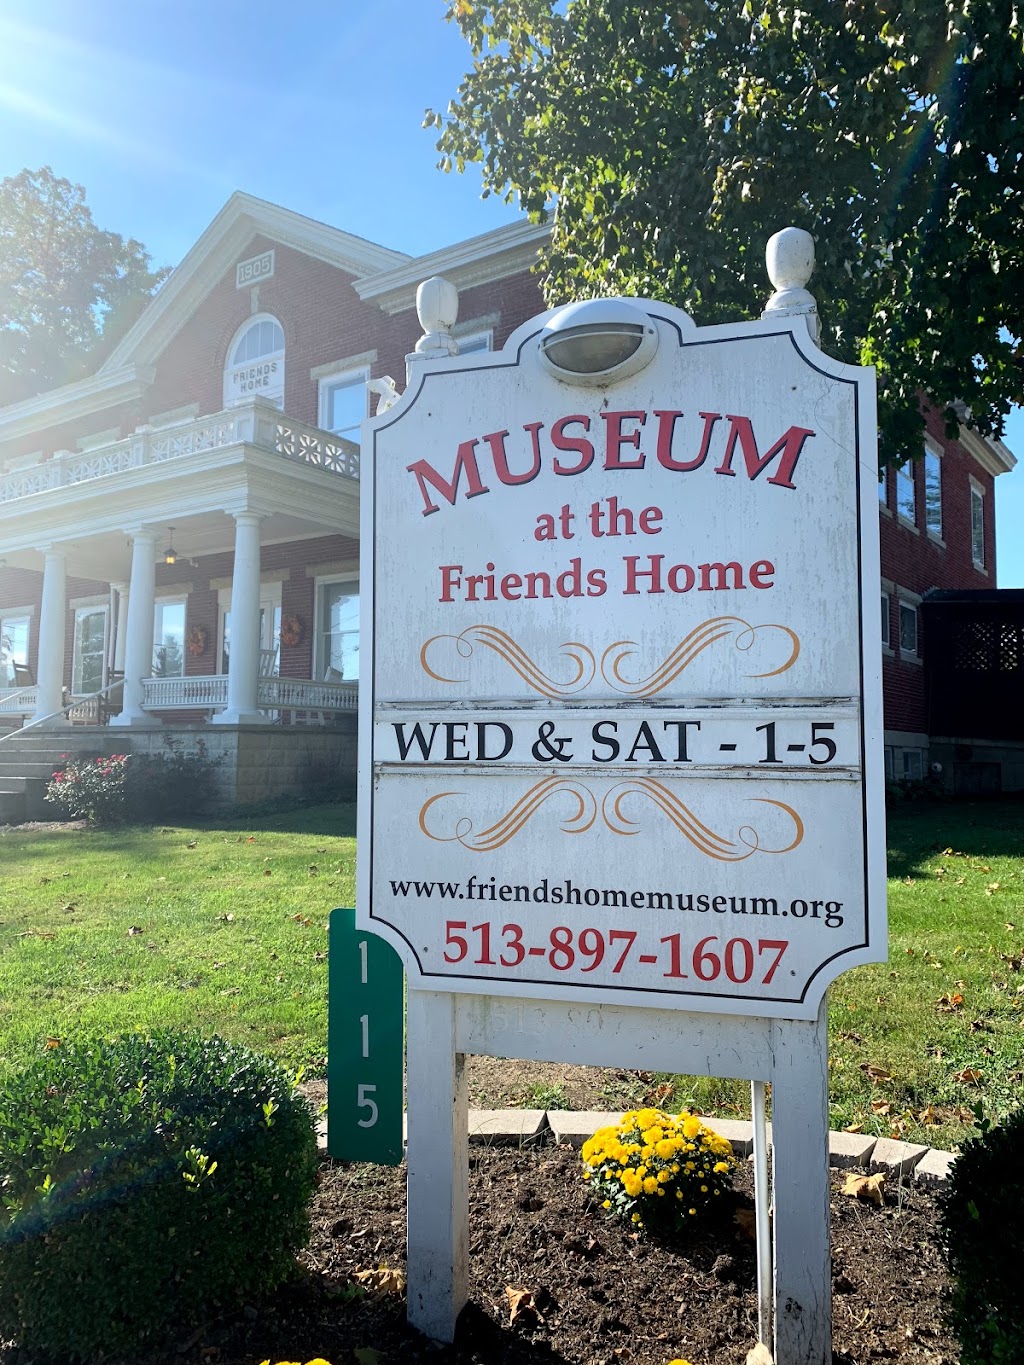 Museum at the Friends Home - museum  | Photo 10 of 10 | Address: 115 S 4th St, Waynesville, OH 45068, USA | Phone: (513) 897-1607